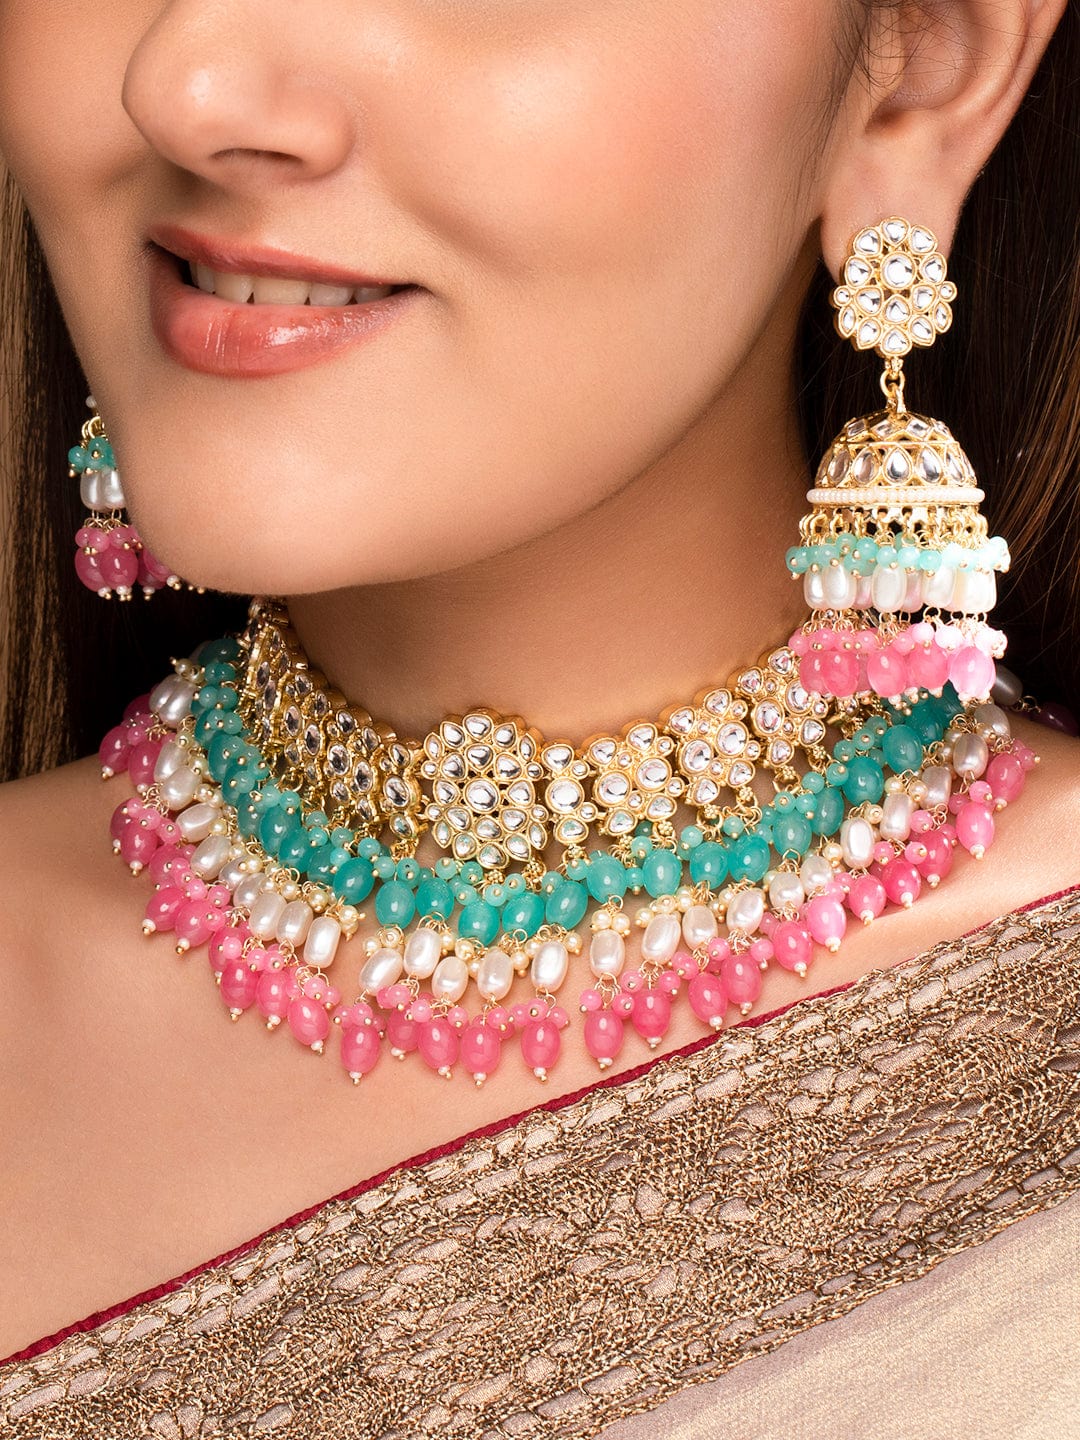 Rubans Kundan Necklace Set With Pink And Green Beads And Jhumki Earrings. Necklace Set